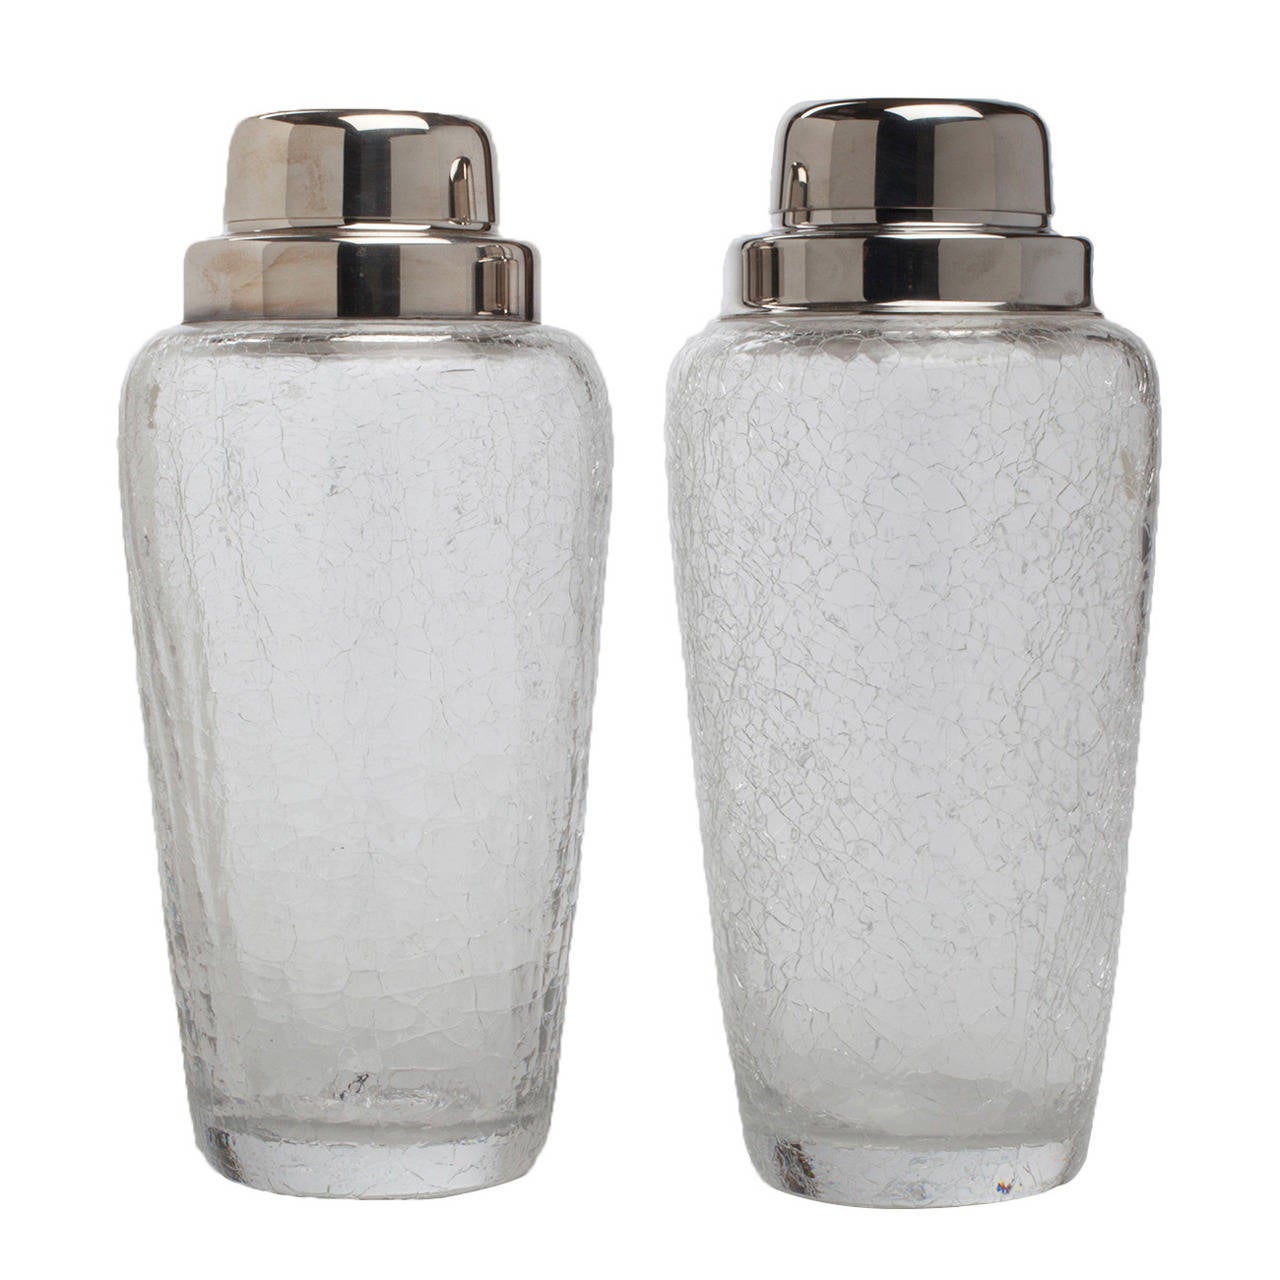 Pair of silver-plated crackle glass cocktail shakers, 1950